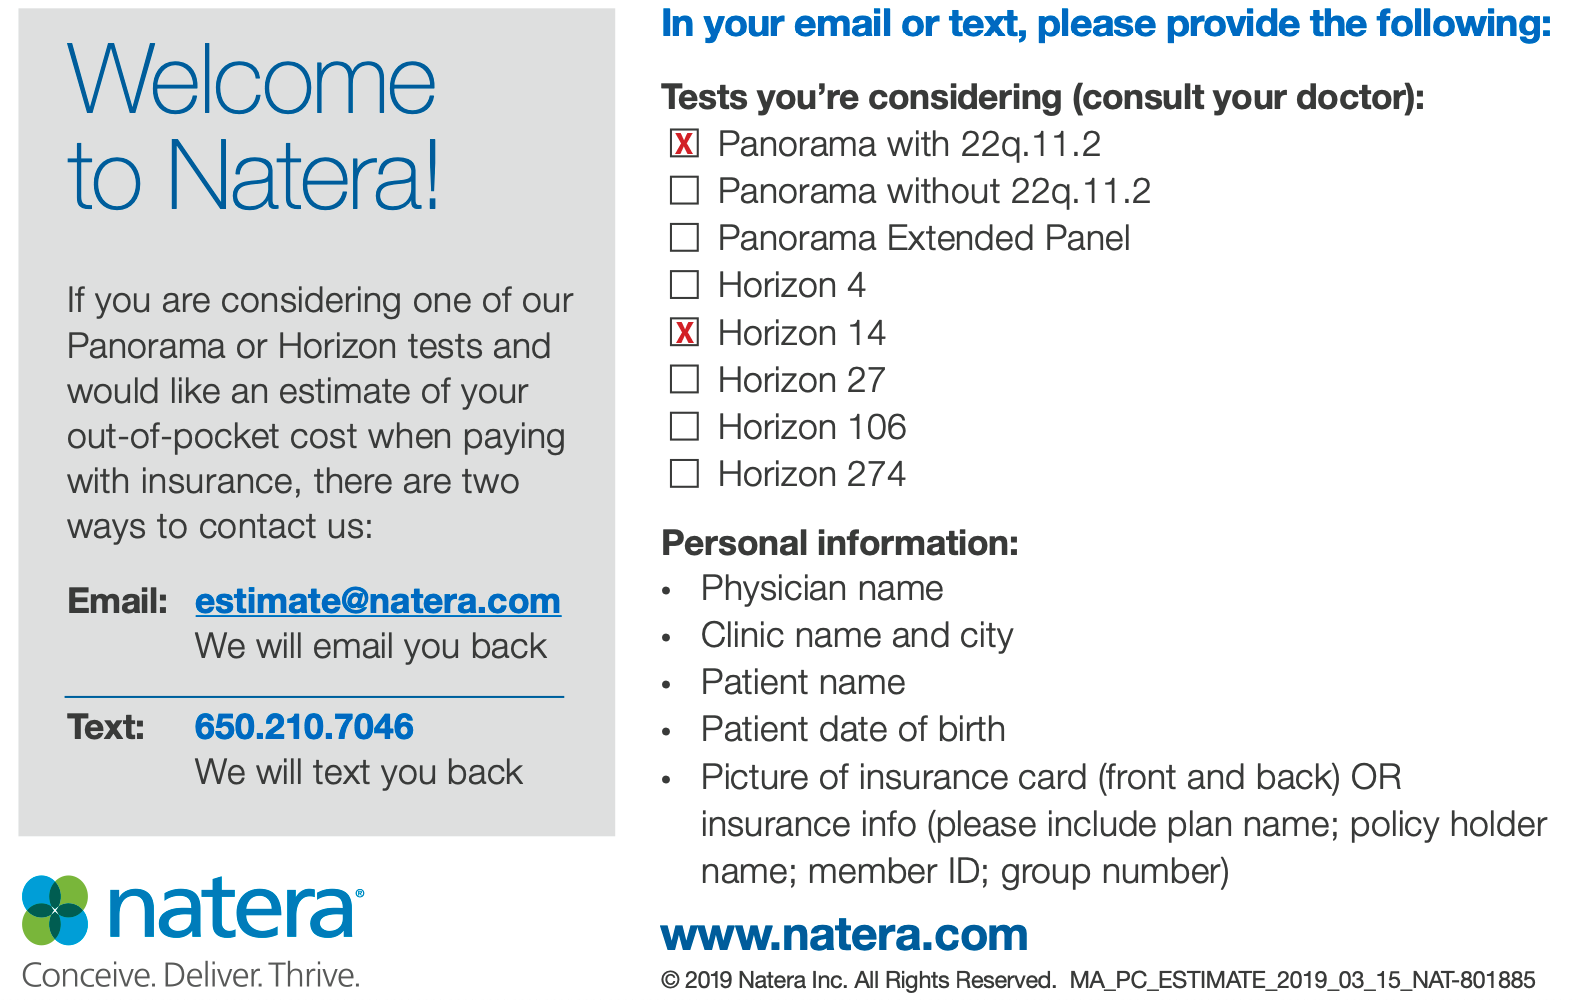 Natera estimate guide with choices 'Panorama with 22q.11.2 and Horizon 14 checked.  Email to: estimate@natera.com or text to: 650-210-7046